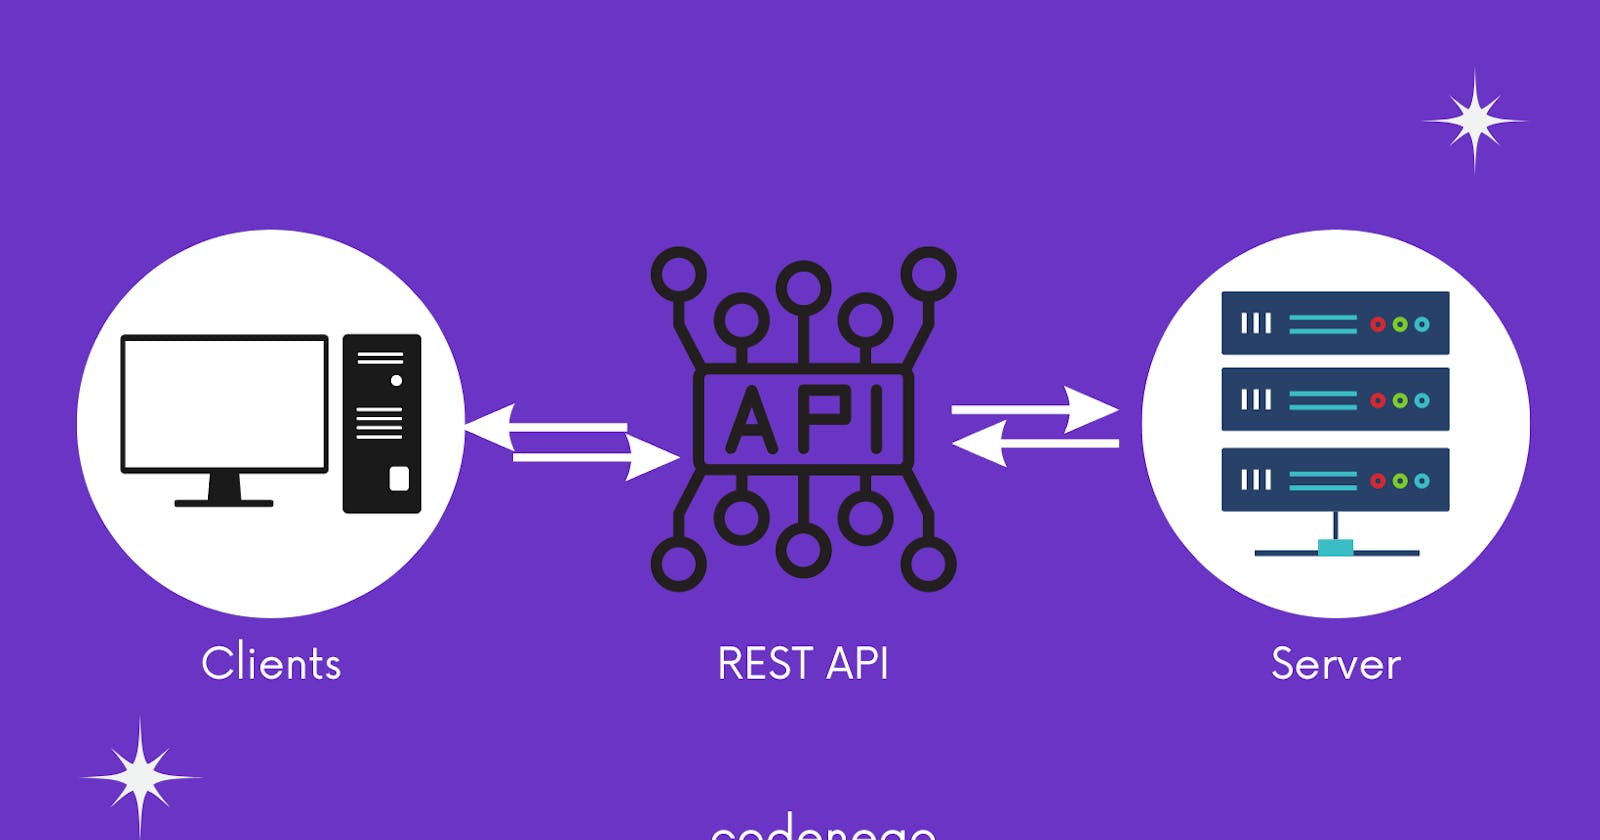 A Beginner's Guide to RESTful Web Services and API Design